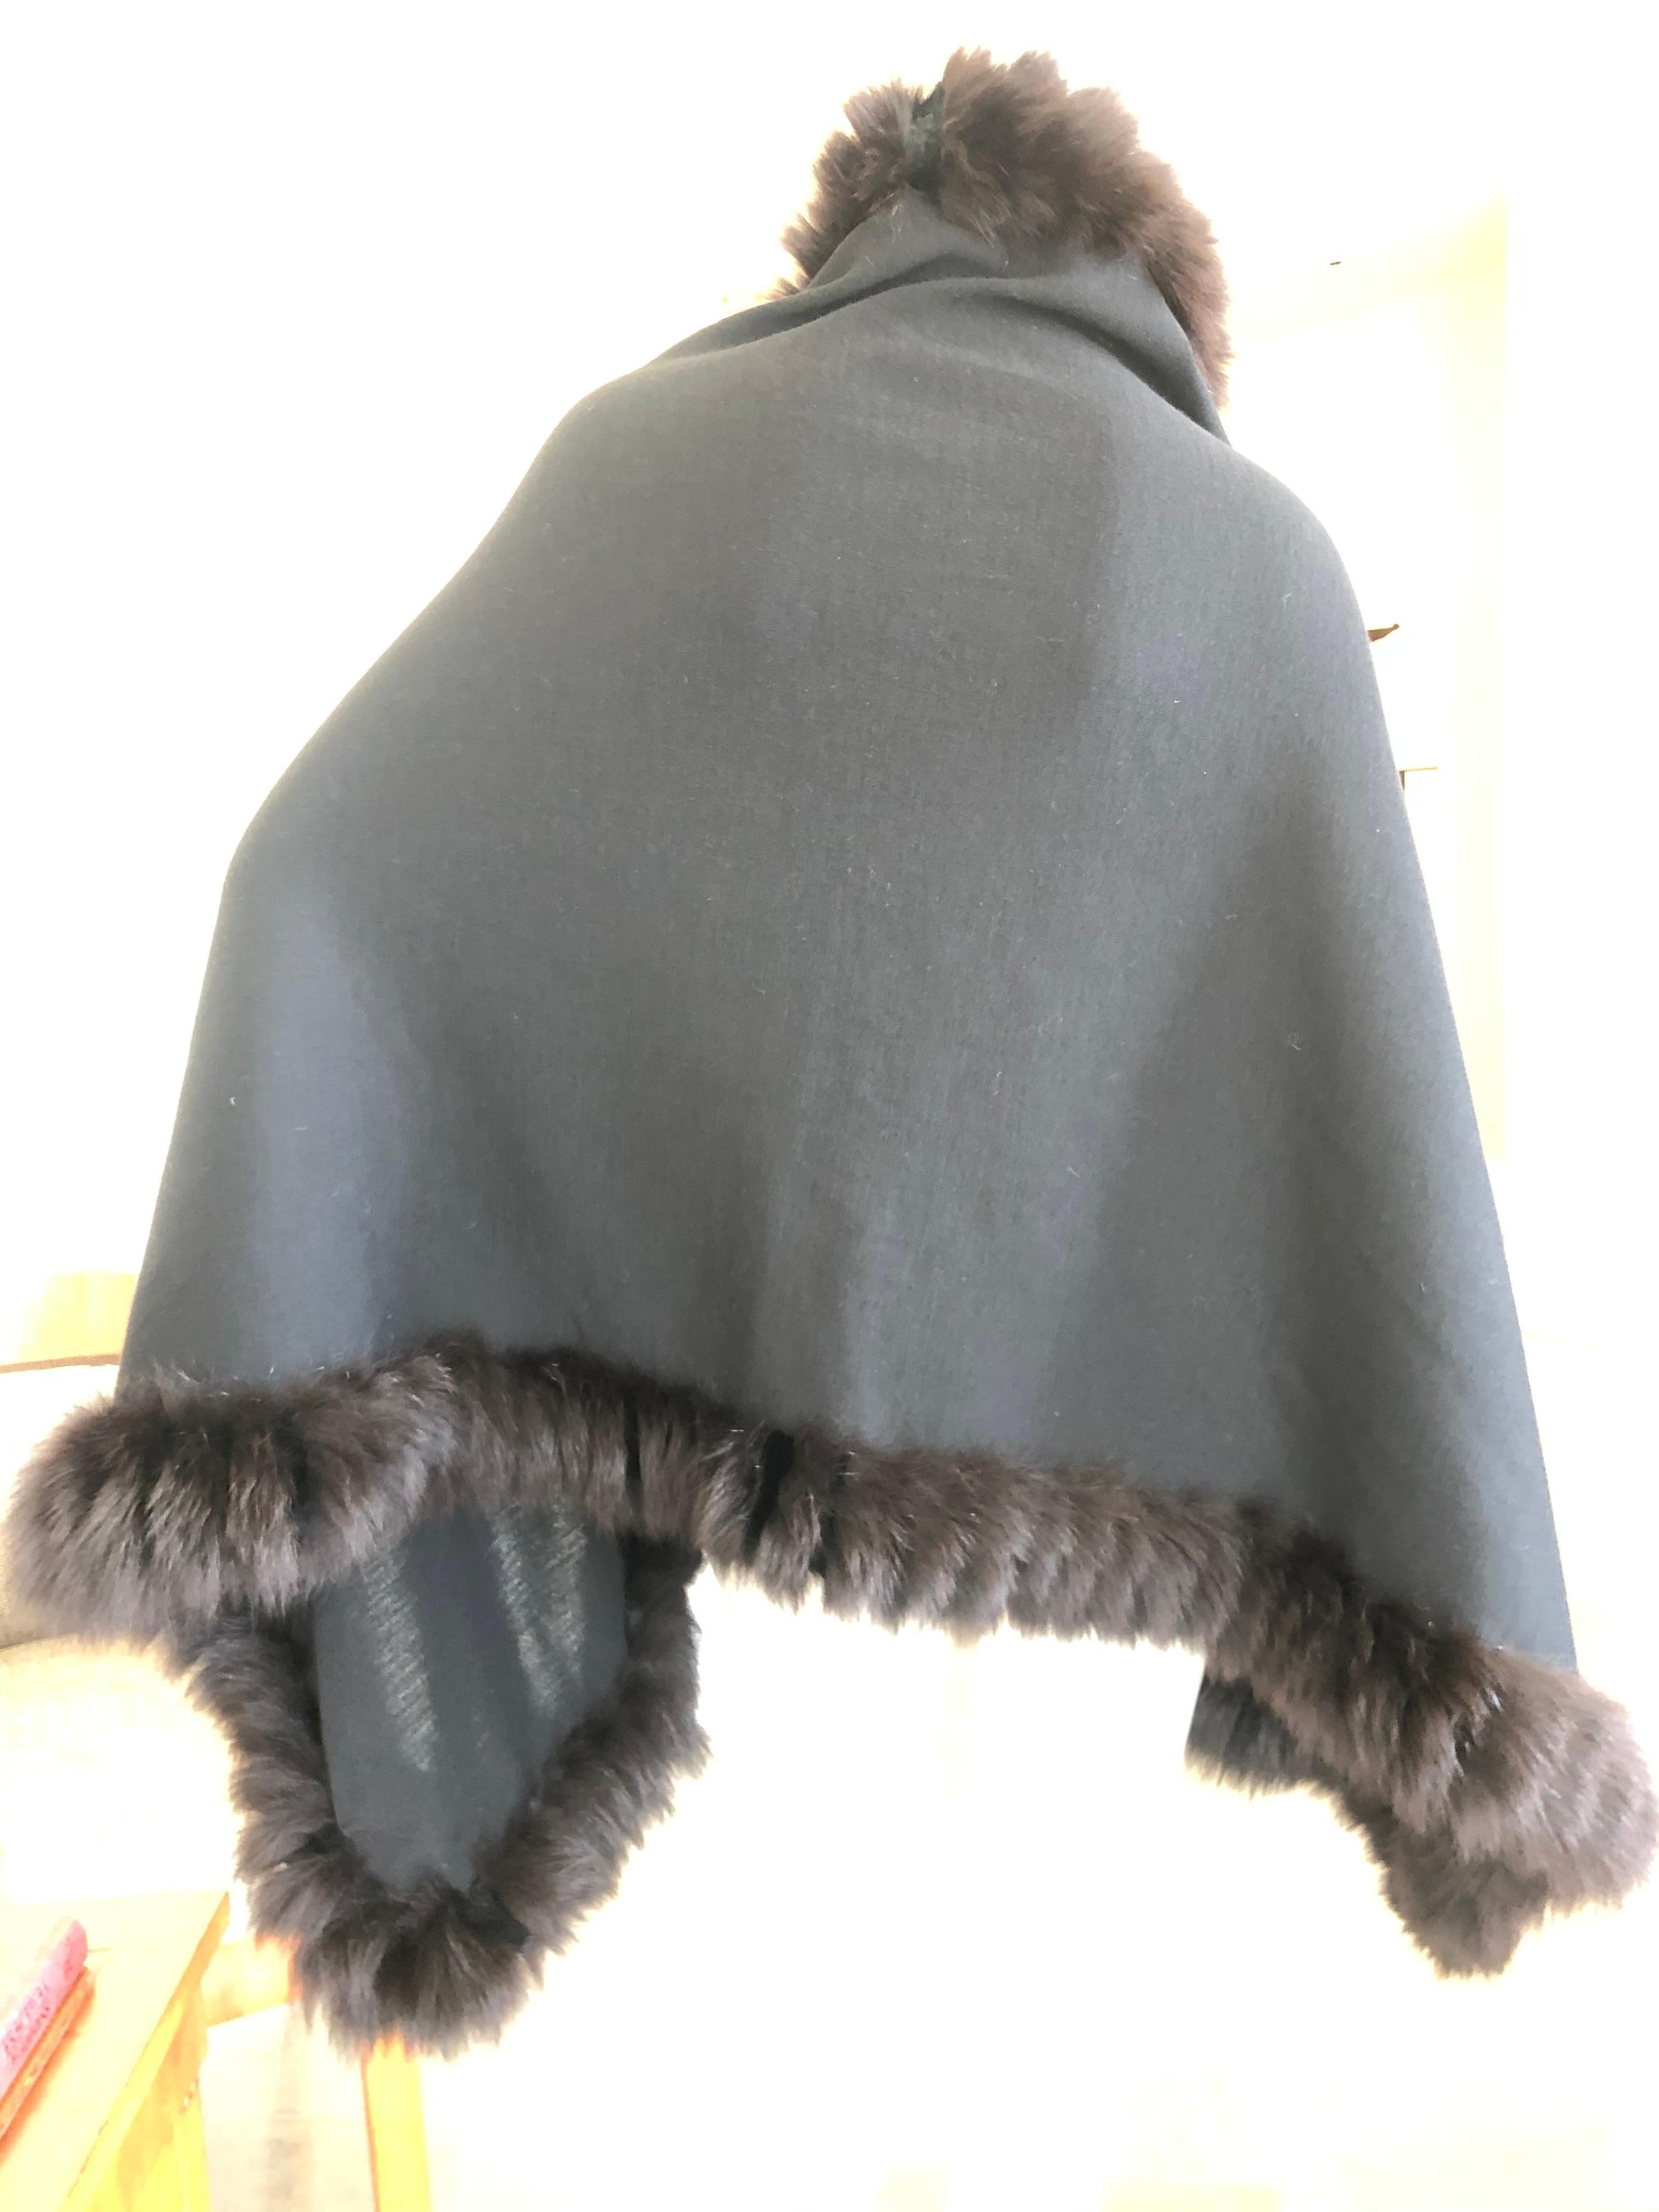 Yves Saint Laurent Fourrures Luxe Vintage Black Jersey Shawl w Fox Fur Trim  In Excellent Condition For Sale In Cloverdale, CA